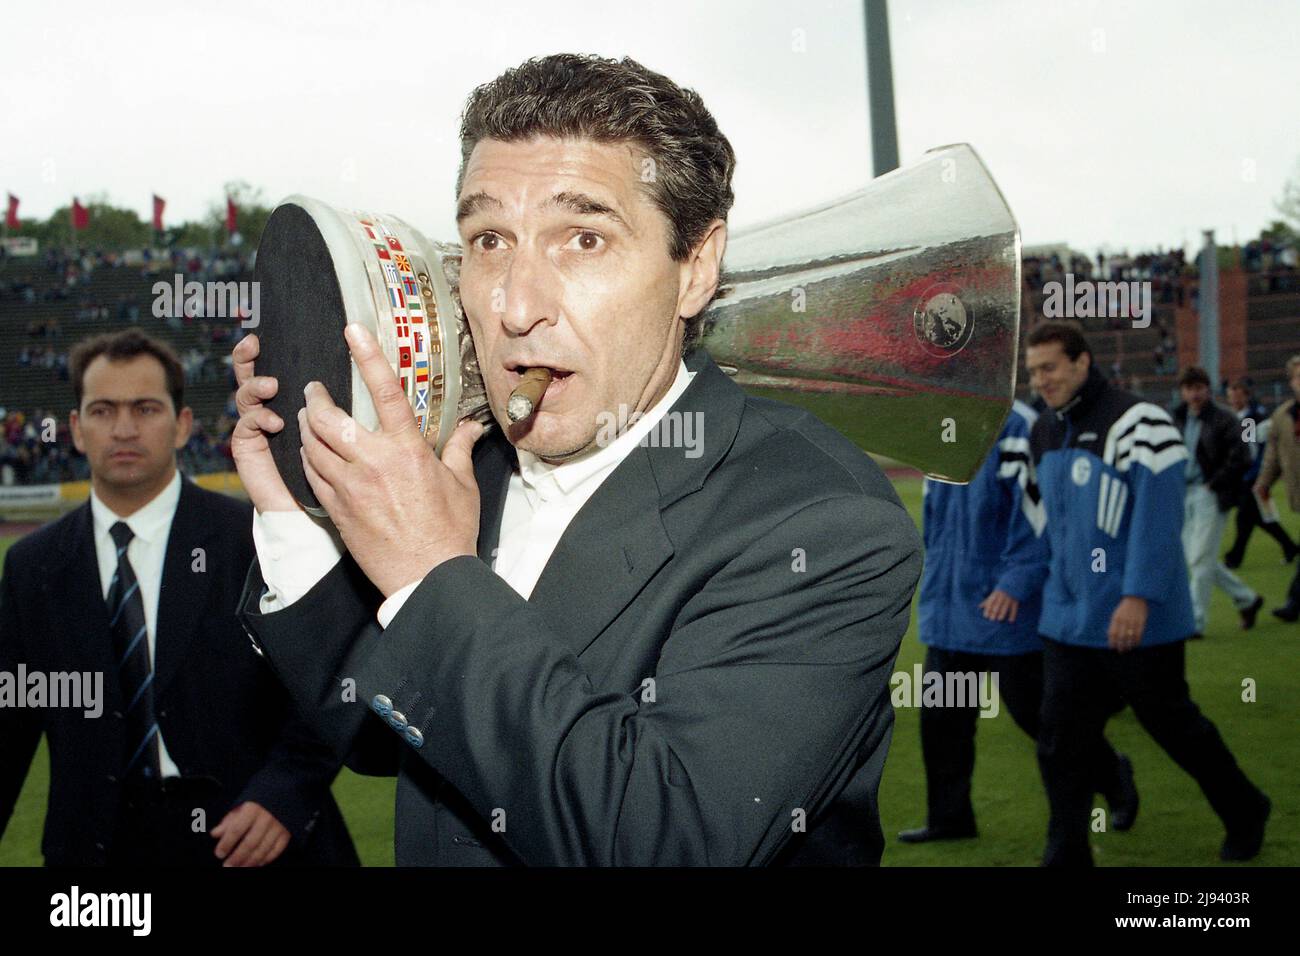 ARCHIVE PHOTO: 25 years ago, May 21, 1997, FC Schalke 04 wins the UEFA Cup, Rudi ASSAUER, Germany, football manager, FC Schalke 04, carries on his shoulder the UEFA Cup, UEFA Cup, through the Parkstadion Gelsenkirchen, smoking a cigar, smokers smoke, on May 22nd, 1997, Stock Photo